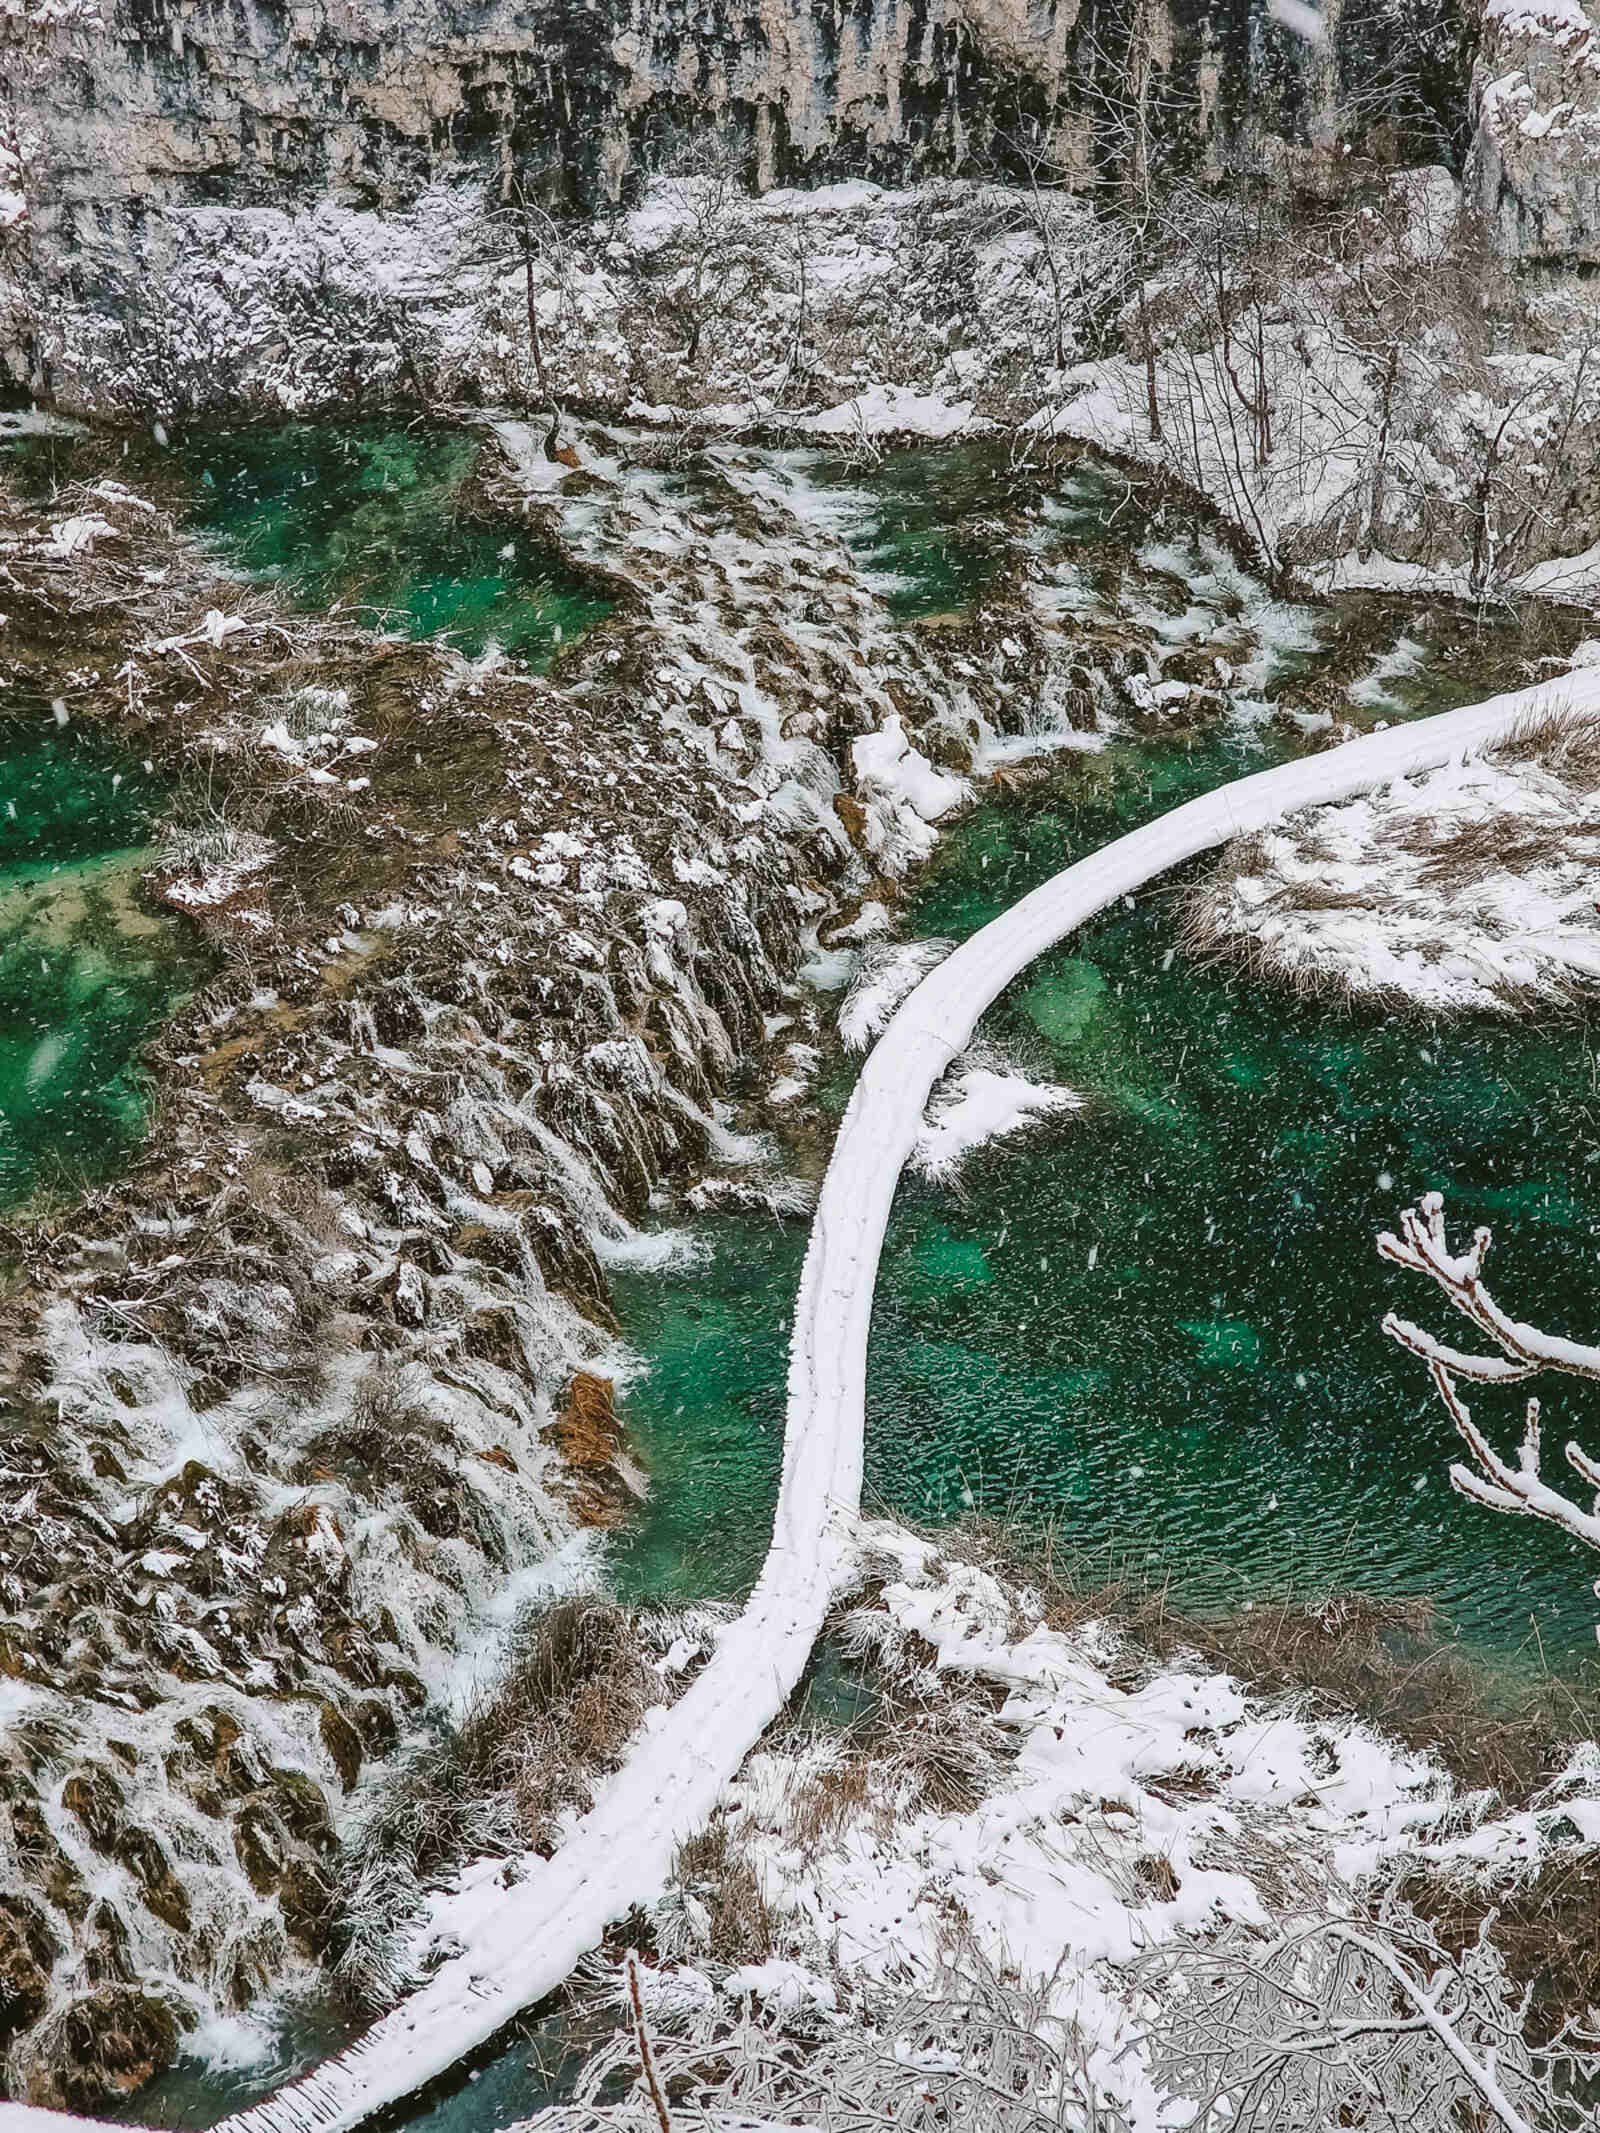 Looking down a cliff to a turquoise blue green lake below with small waterfalls falling into it and a white, snow covered pathway winding above the water